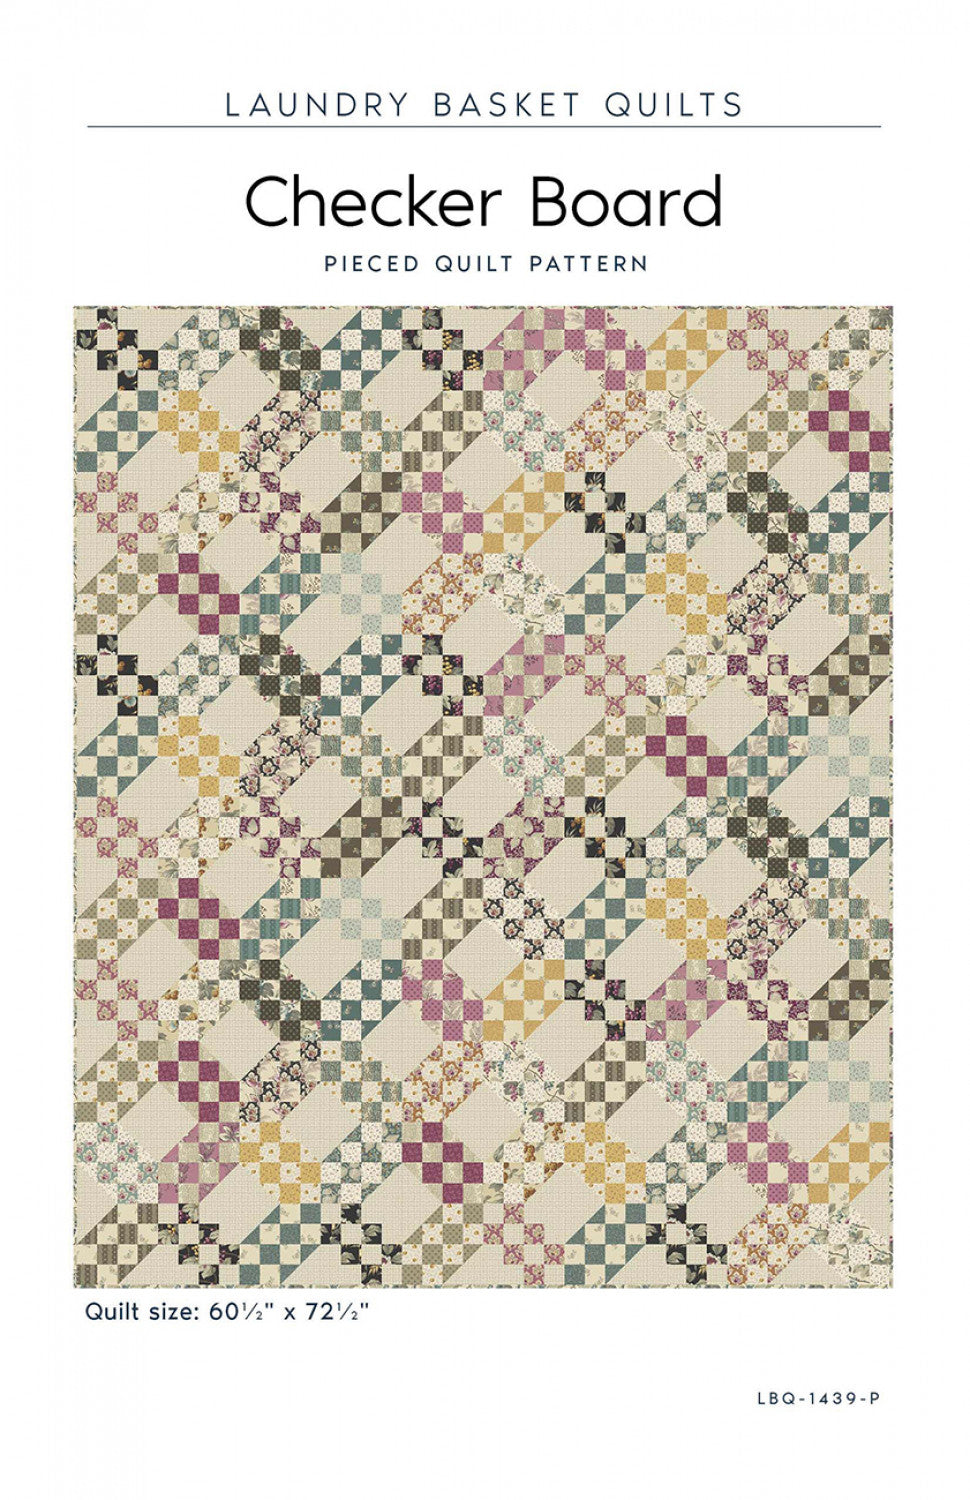 Checker Board Quilt Pattern by Laundry Basket